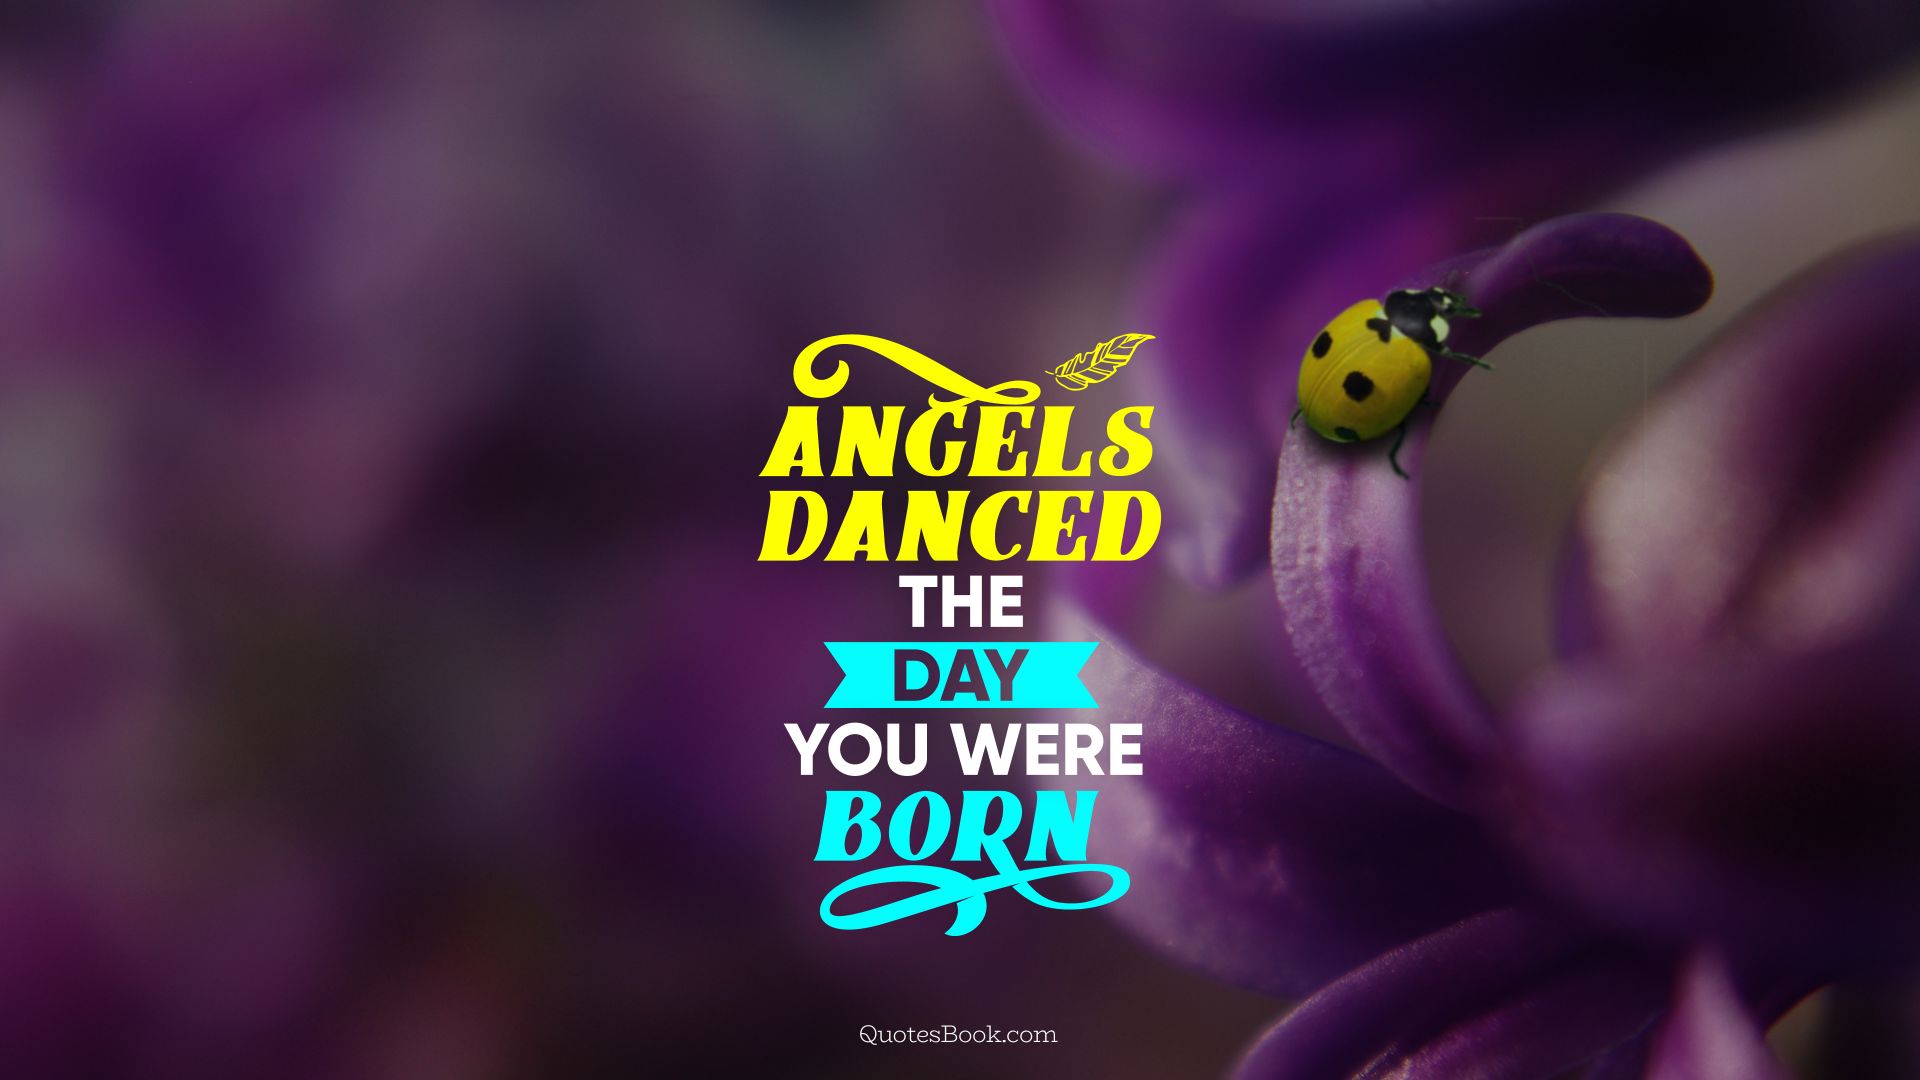 Angels danced the day you were born